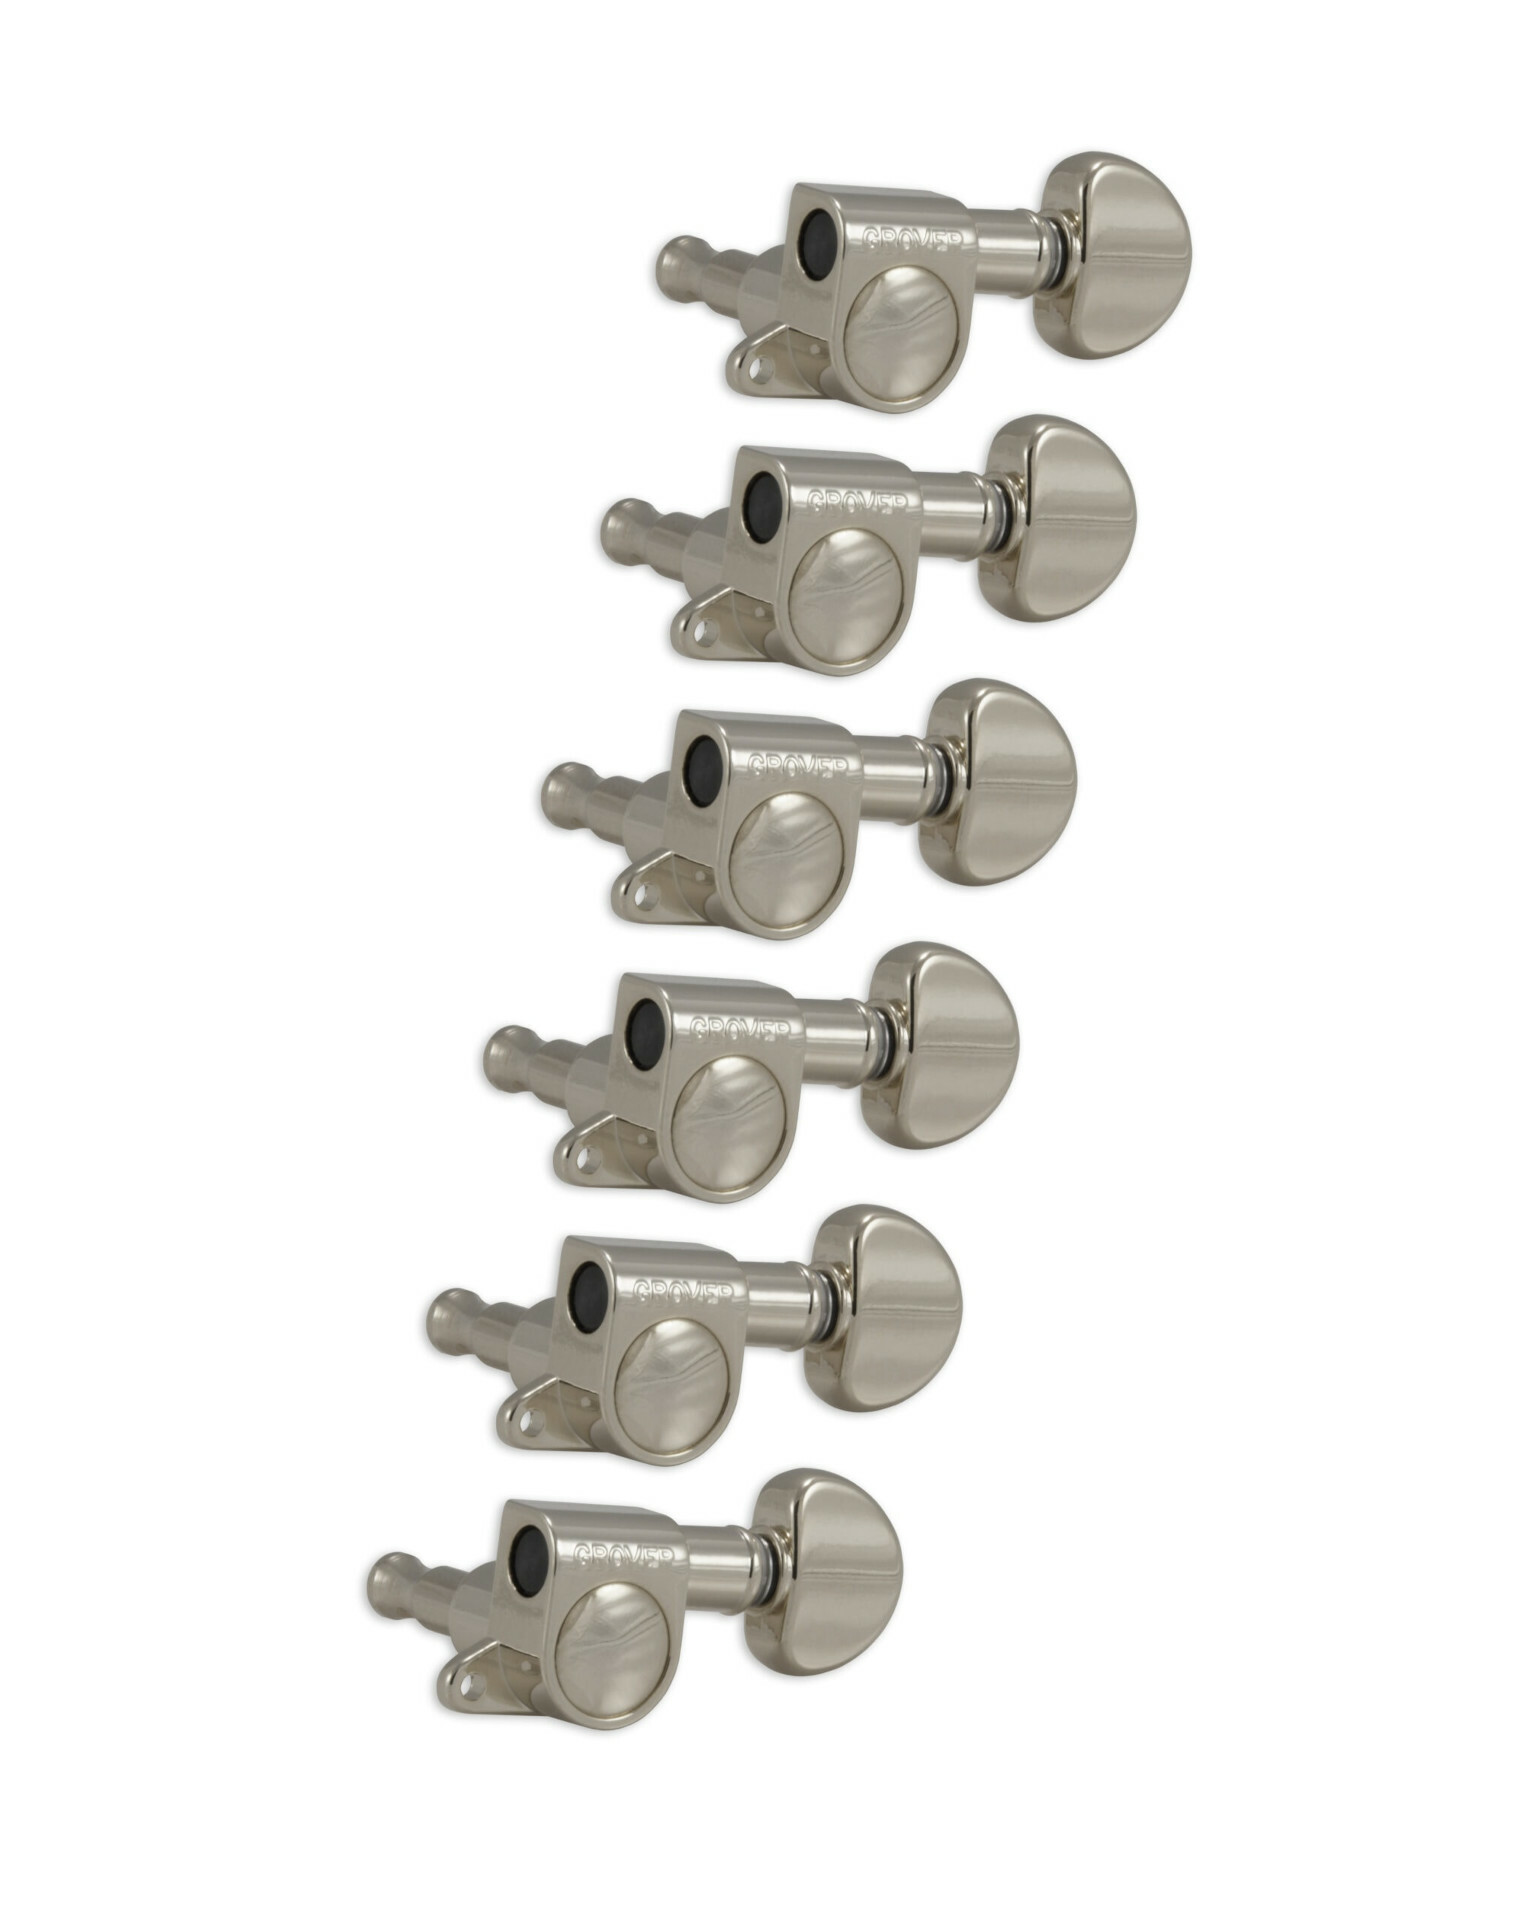 Grover 205N6 Mini Rotomatics with Round Button - Guitar Machine Heads, 6-in-Line, Bass Side (Left) - Nickel